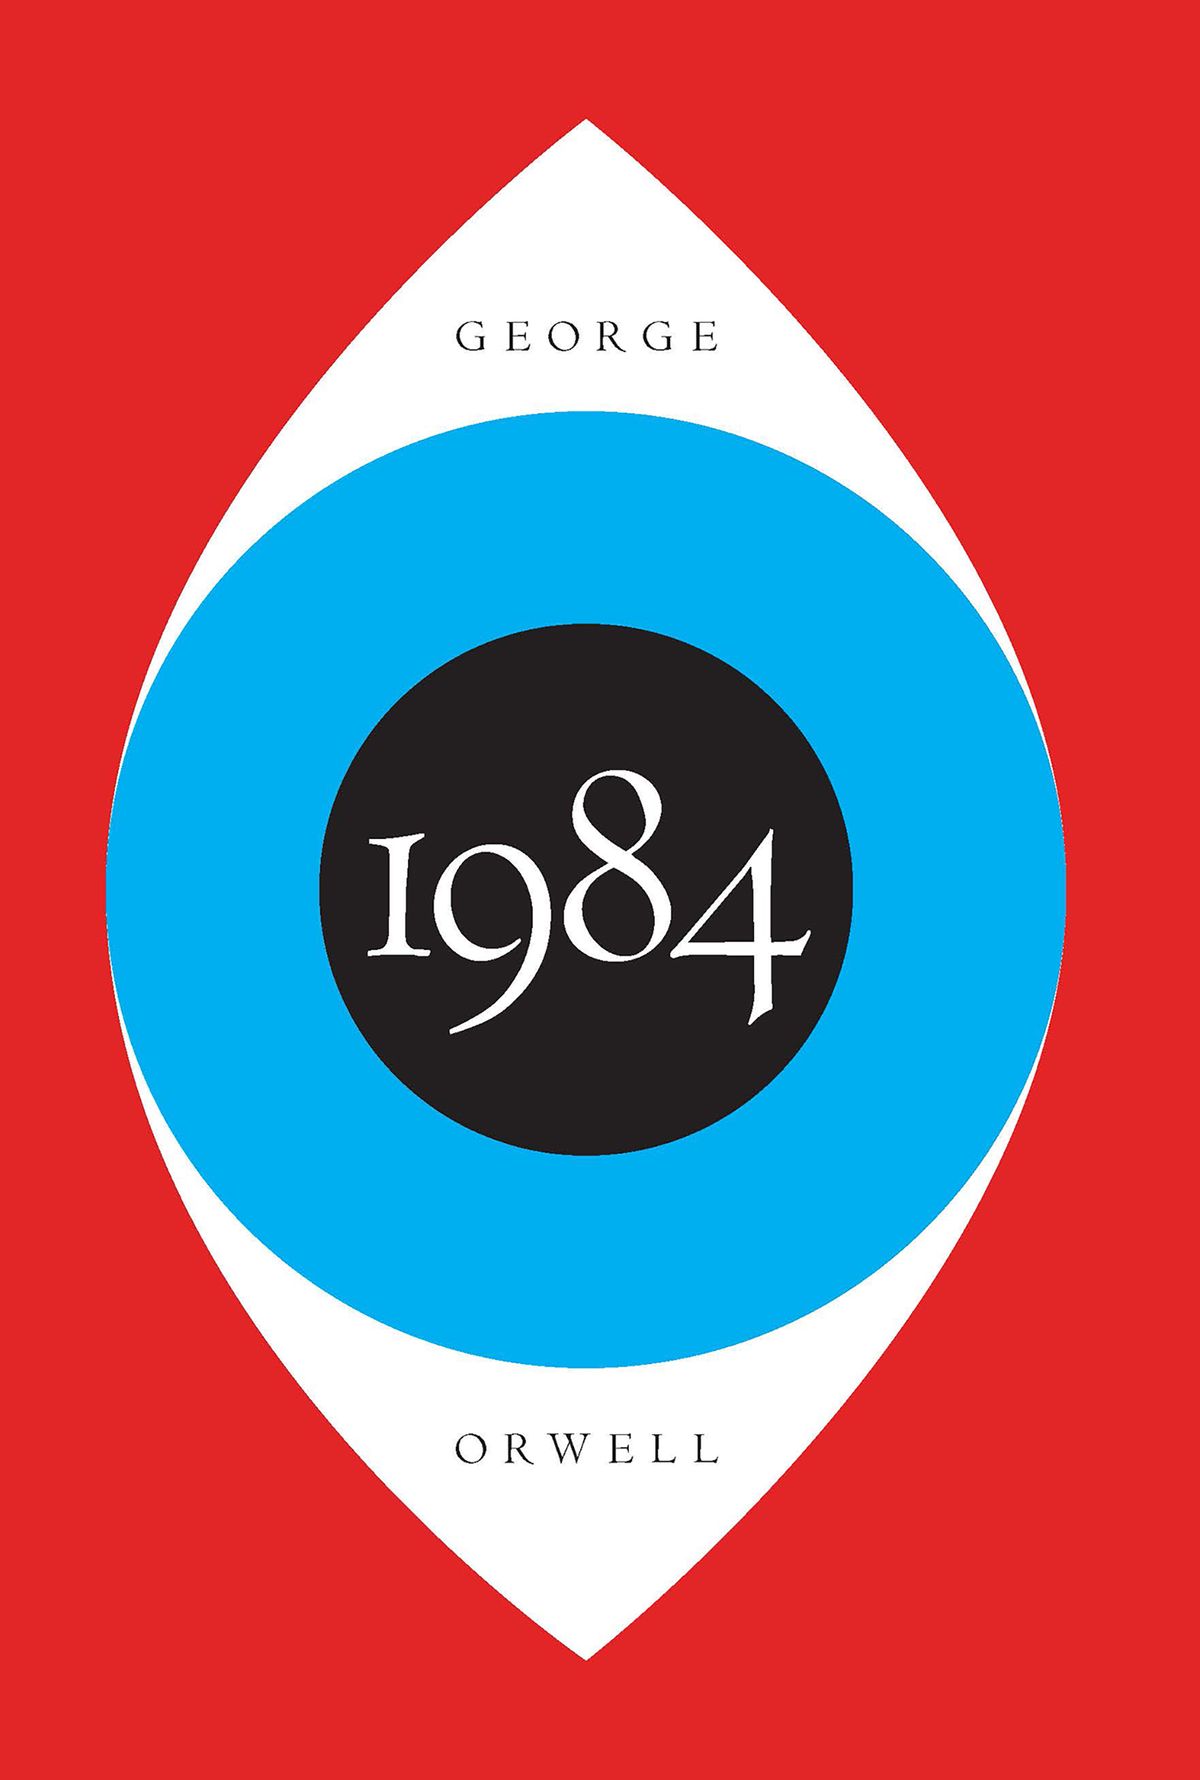 review book 1984